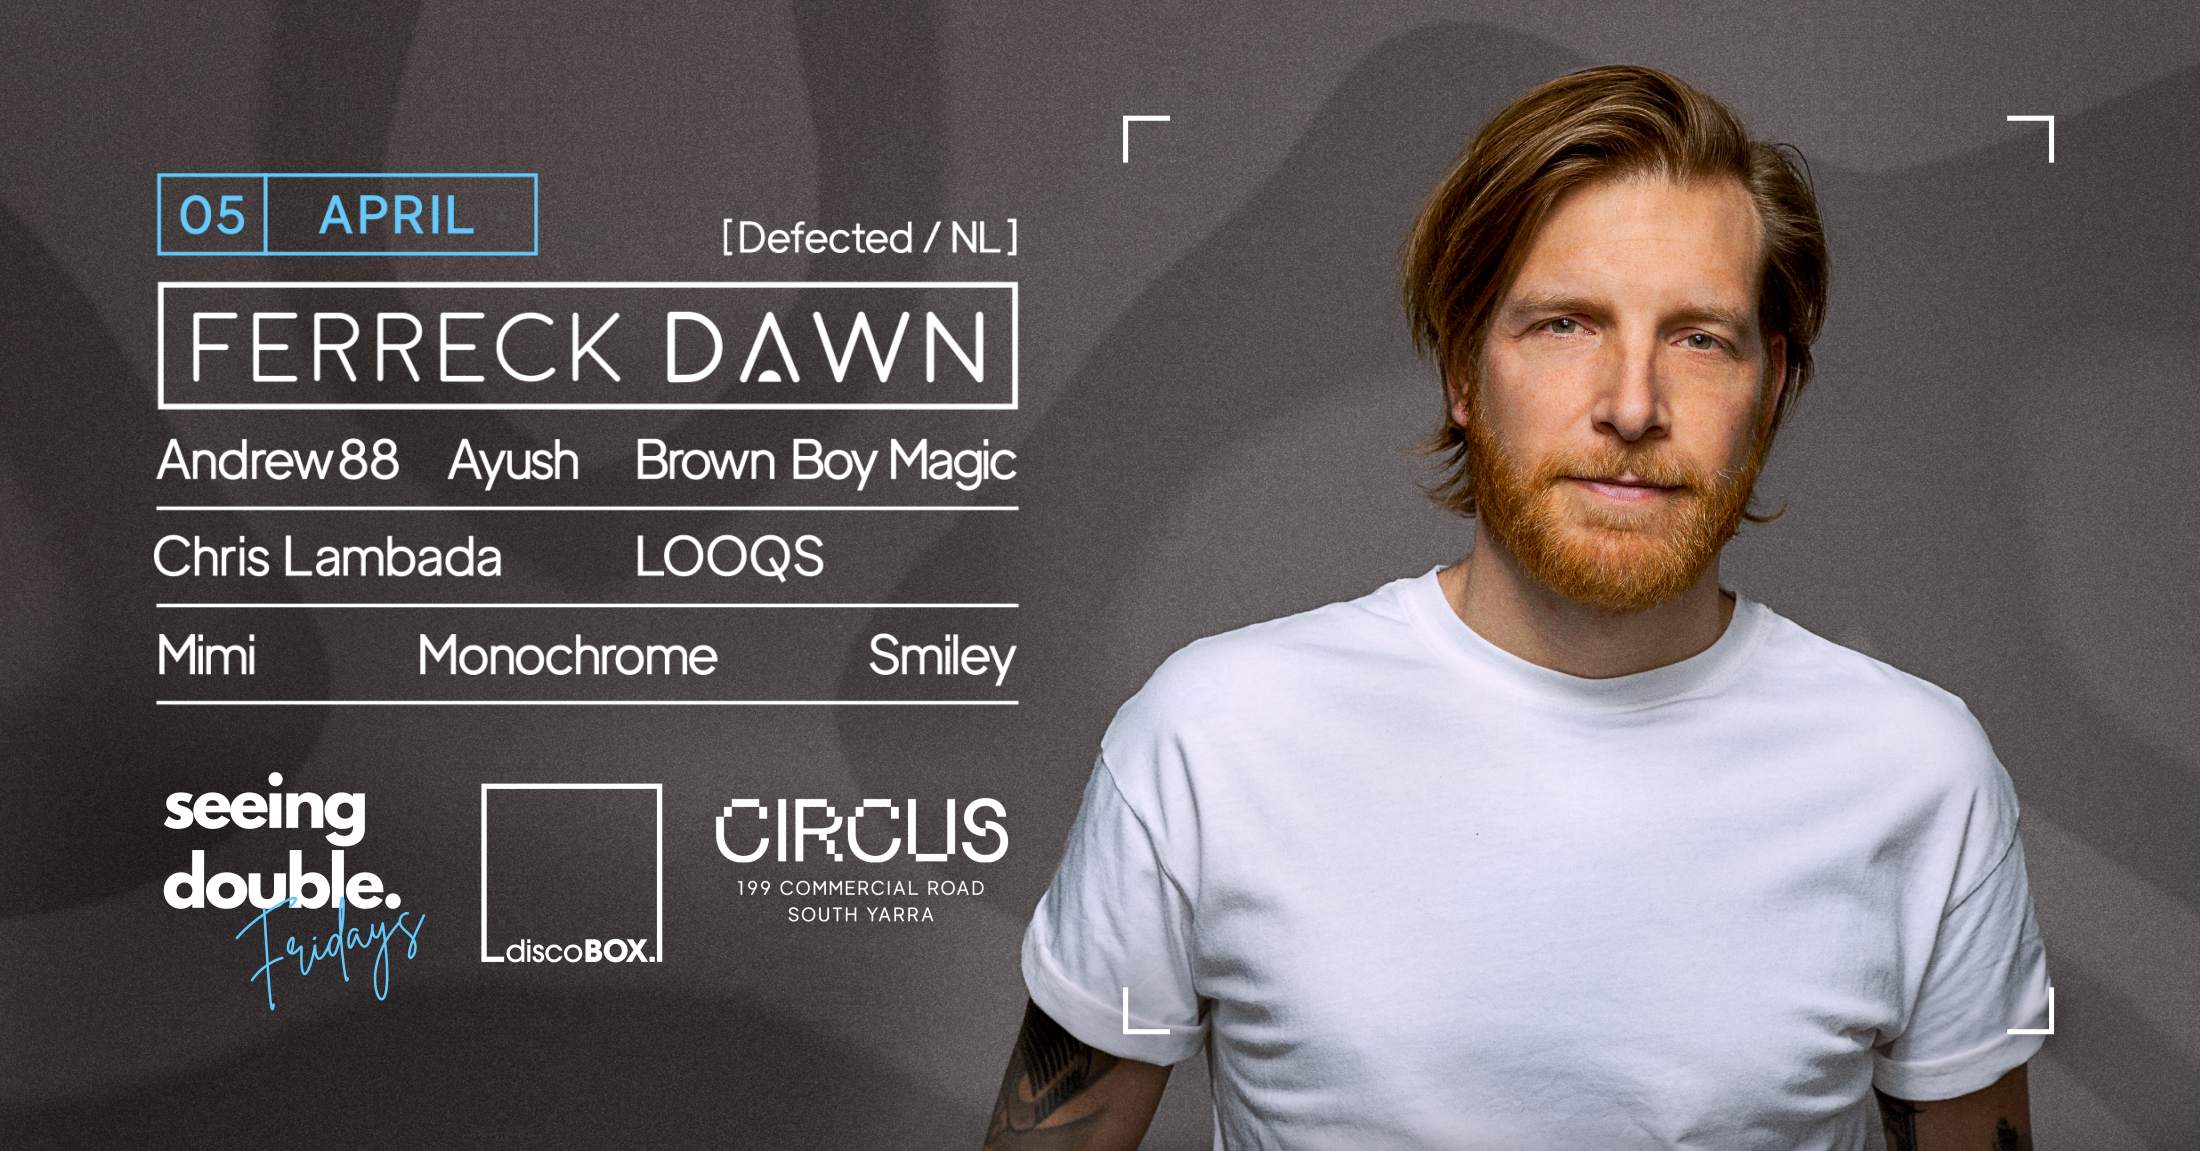 Ferreck Dawn (Defected/NL) at Circus - Seeing Double & discoBOX - フライヤー裏